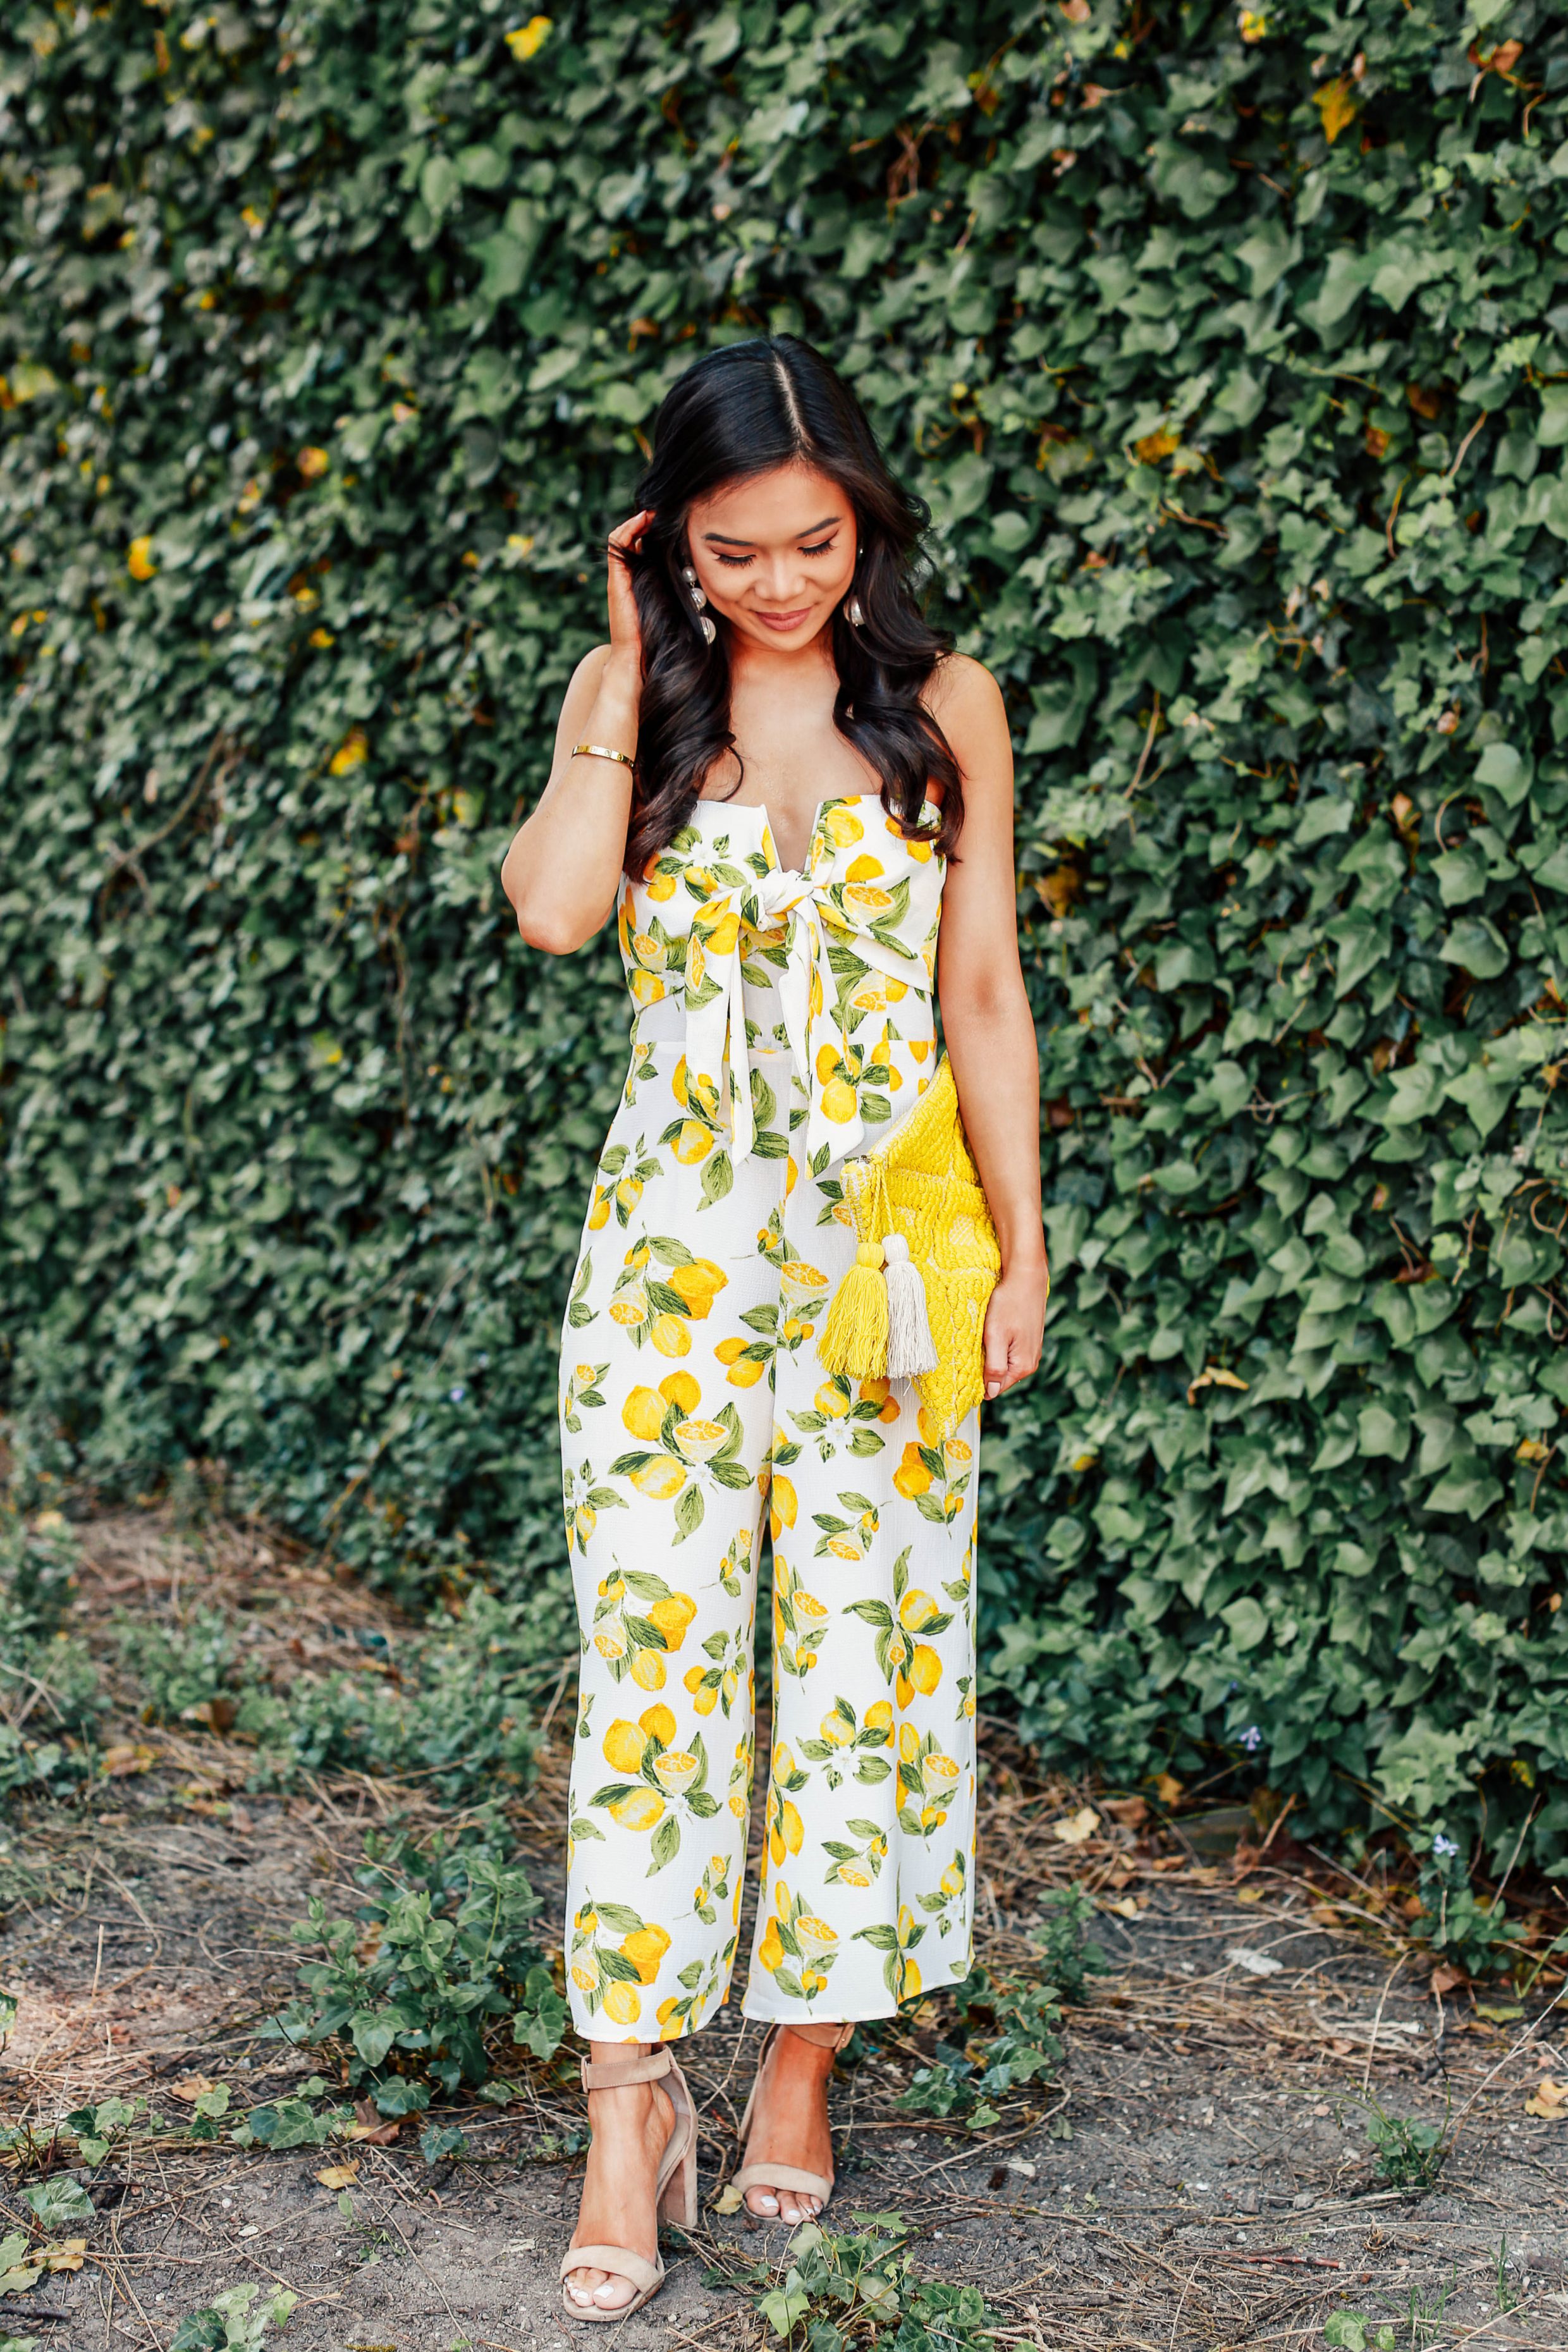 Hoang-Kim wears a strapless lemon print jumpsuit perfect for summer